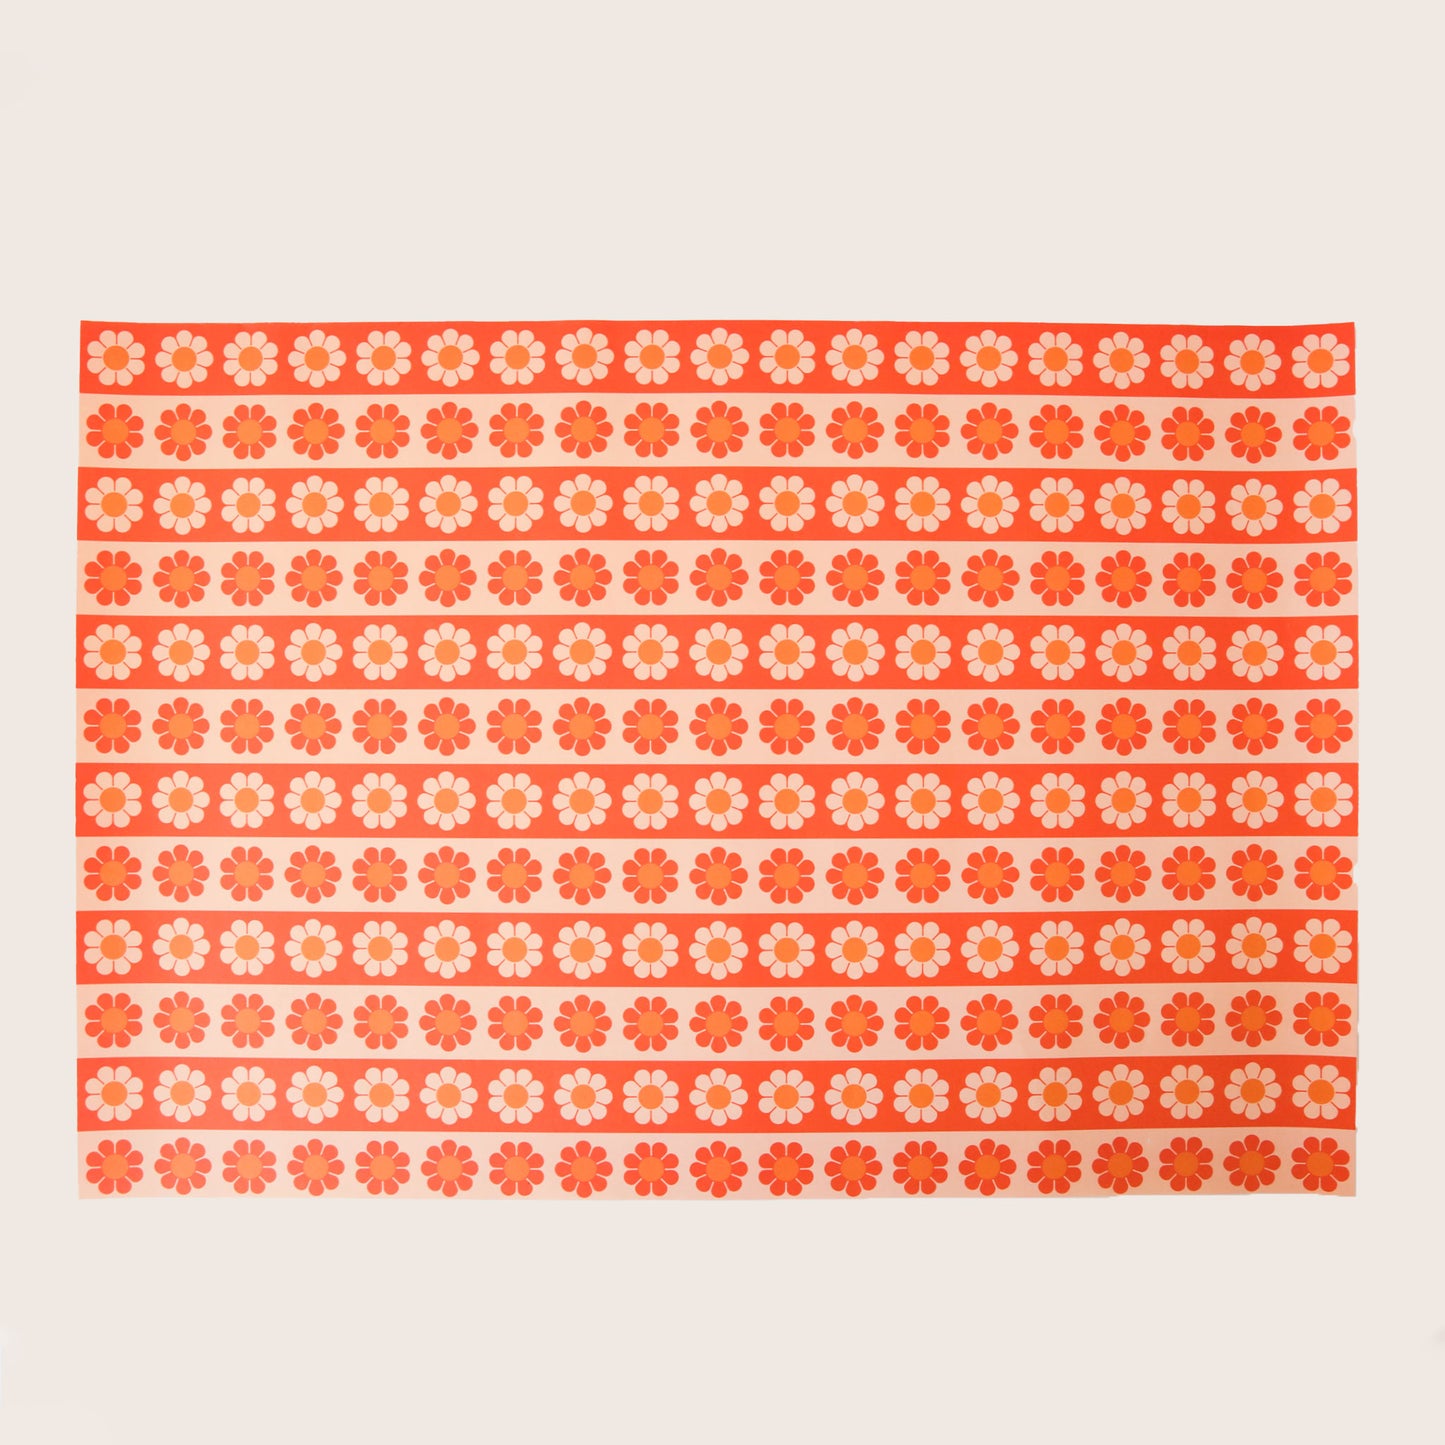 Sheet of wrapping paper filled with horizontal stripes of bright and pastel orange flowers.